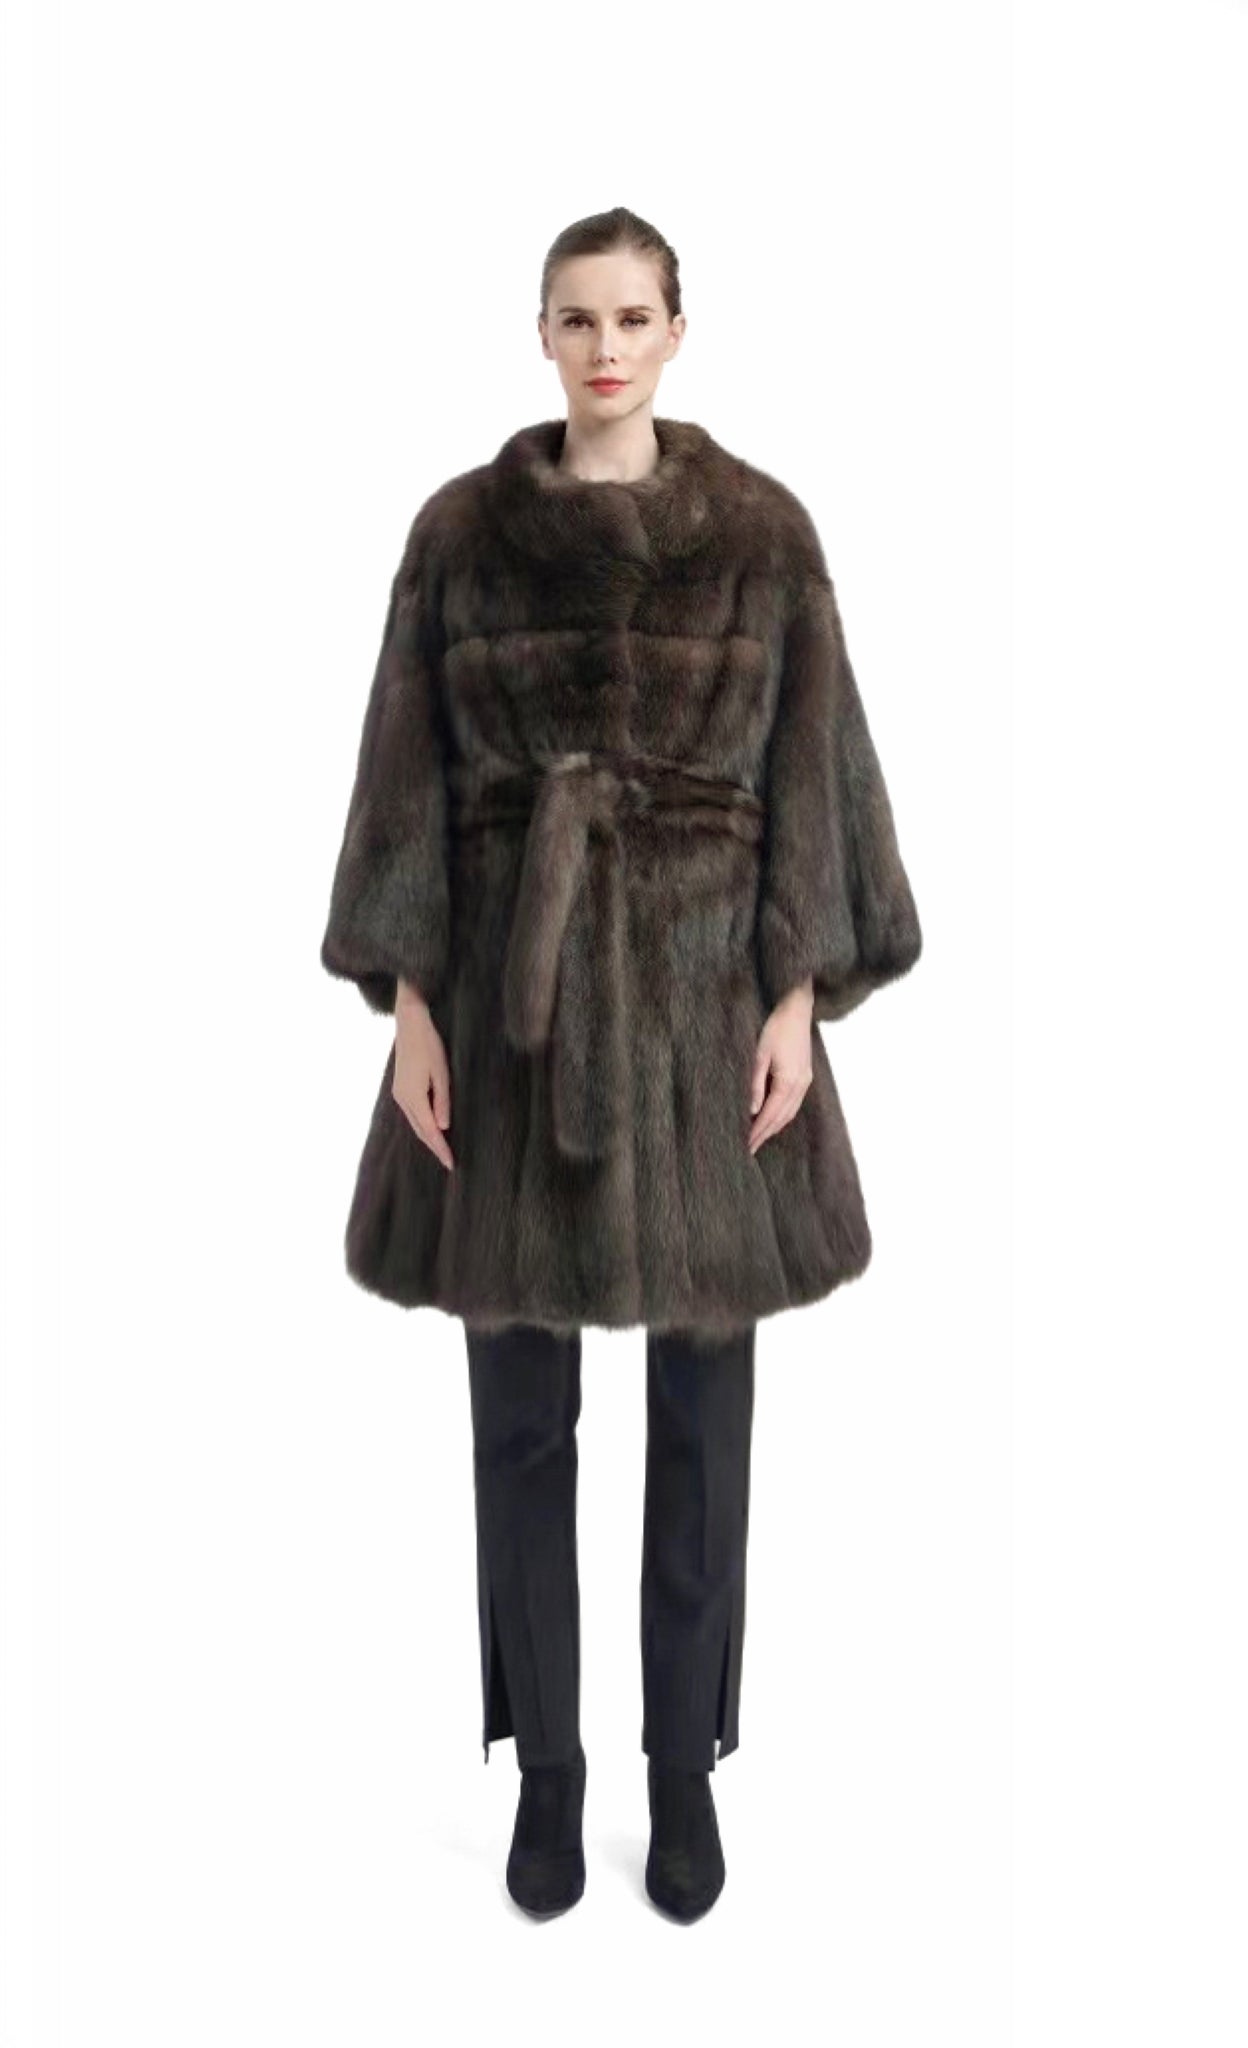 Luxurious Sable Fur Coat - Perfect for Fashionable Women